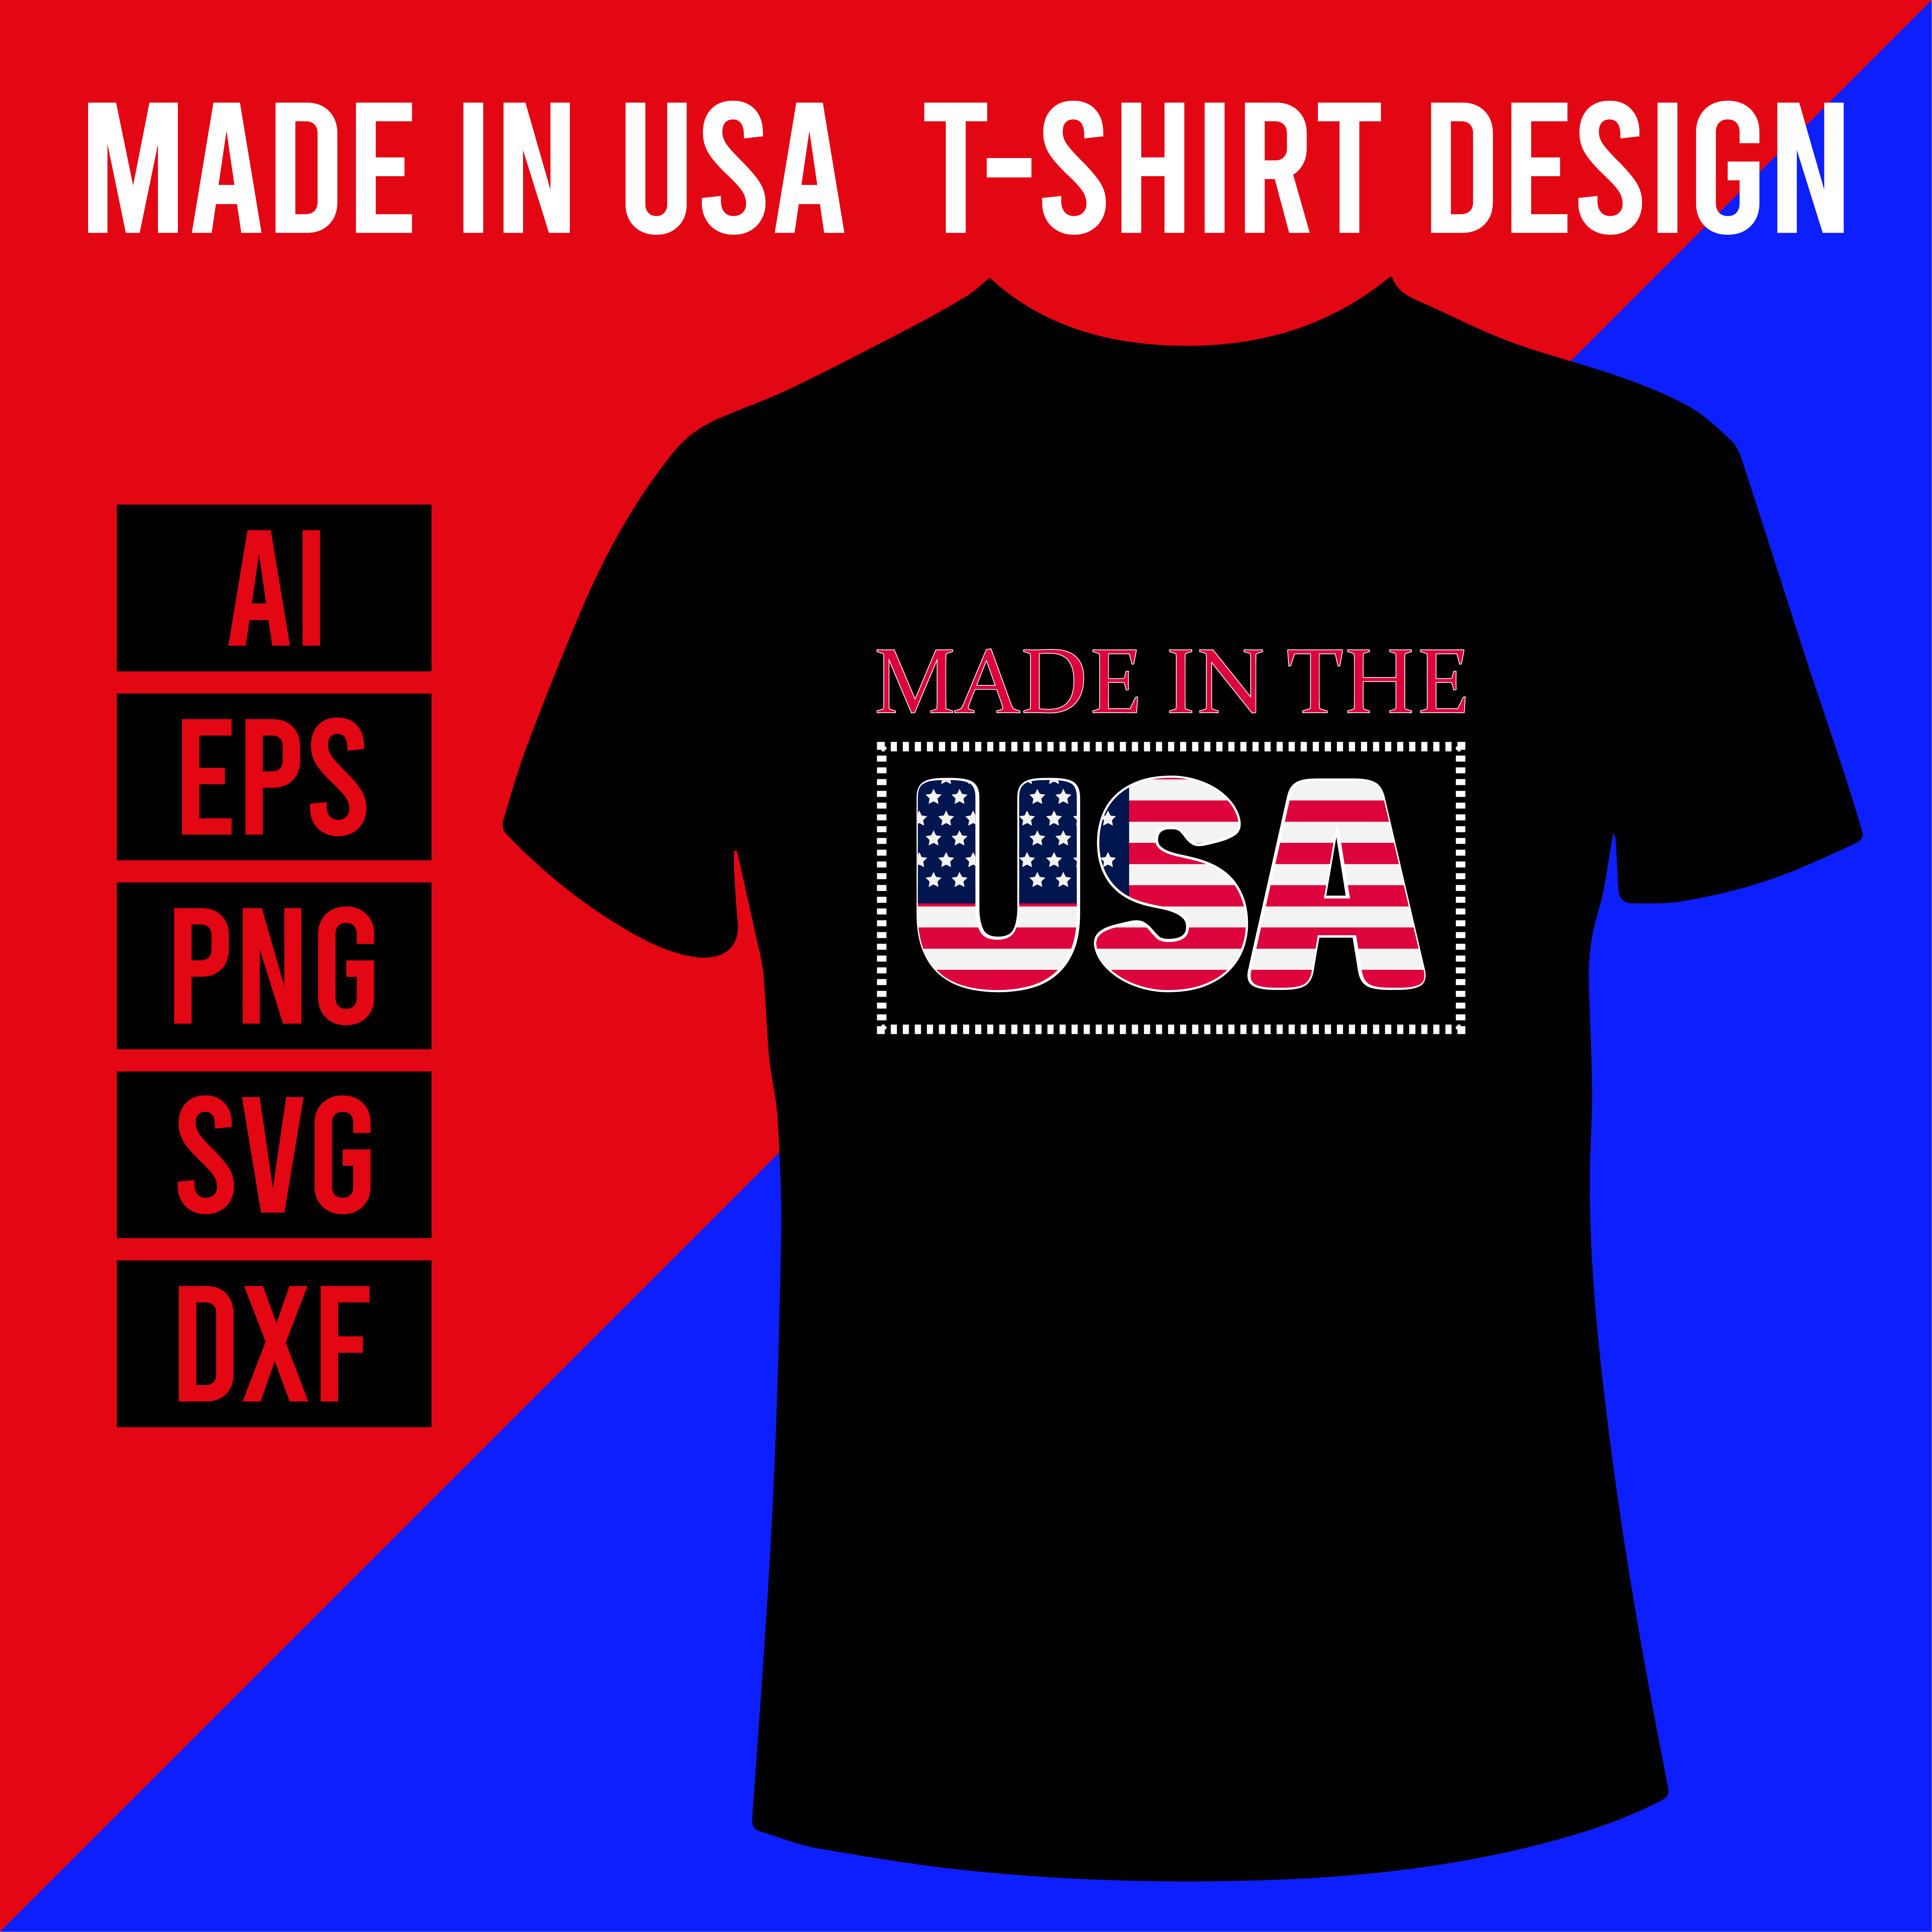 Made in USA T-Shirt Design cover image.